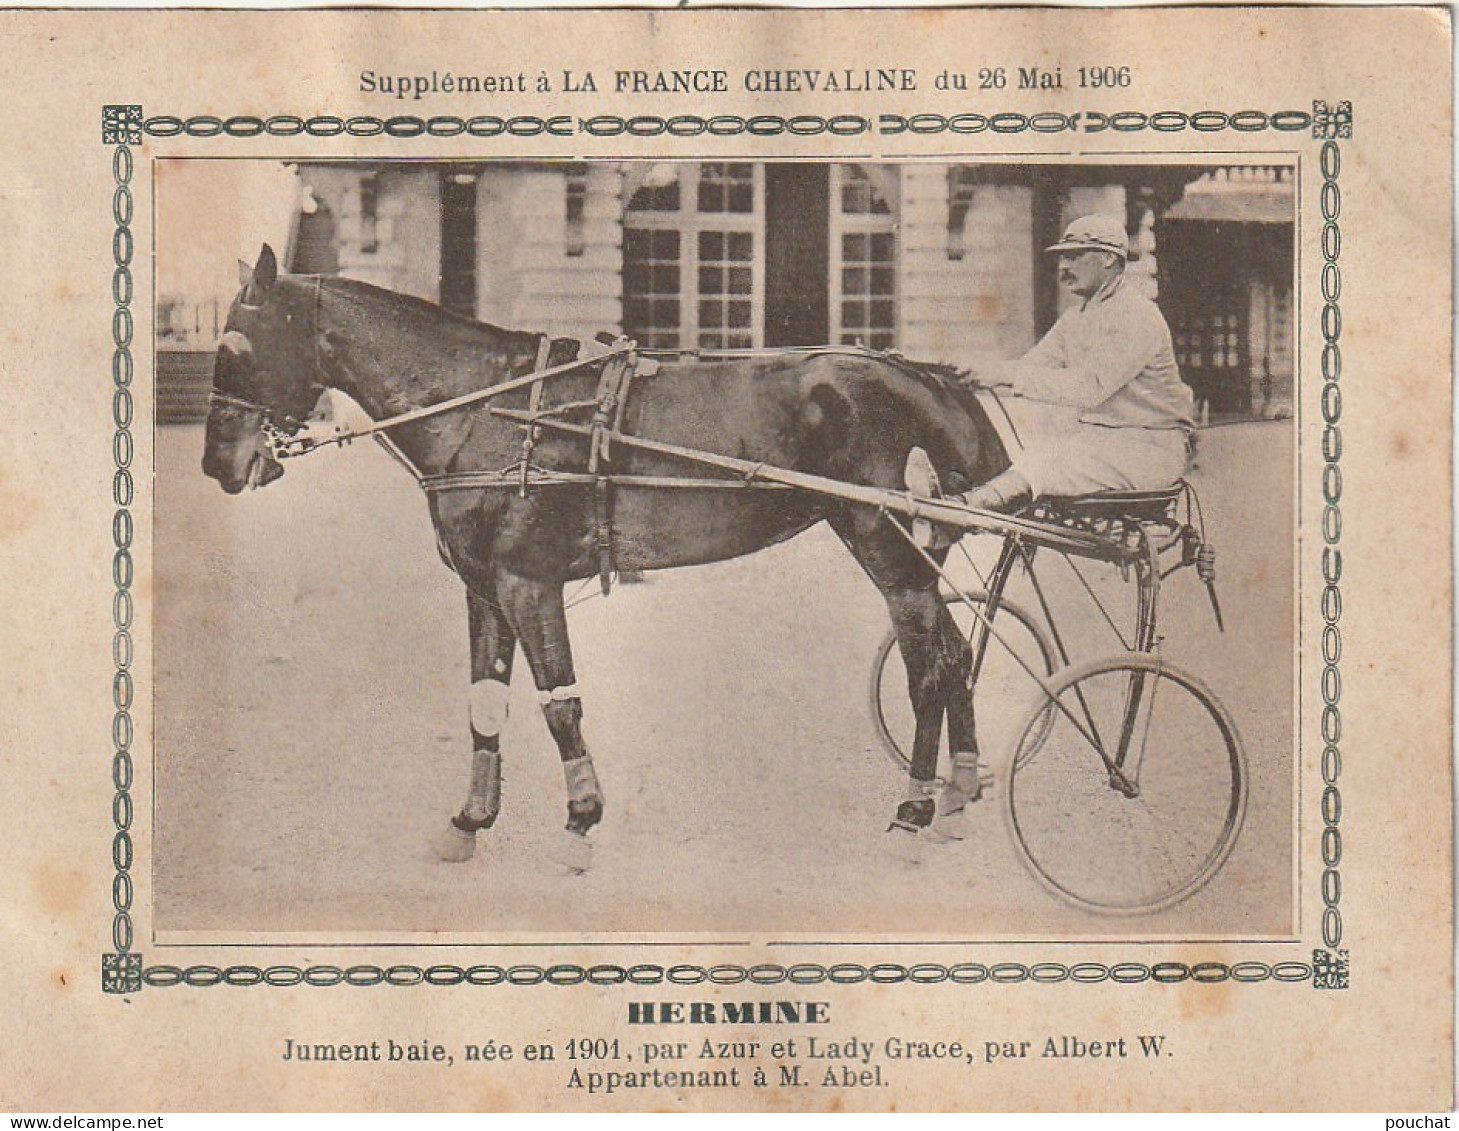 AA+ - " HERMINE " - JUMENT BAIE APPARTENANT A M. ABEL - SUPPL. " FRANCE CHEVALINE " , MAI 1906 - SULKY - Paardensport